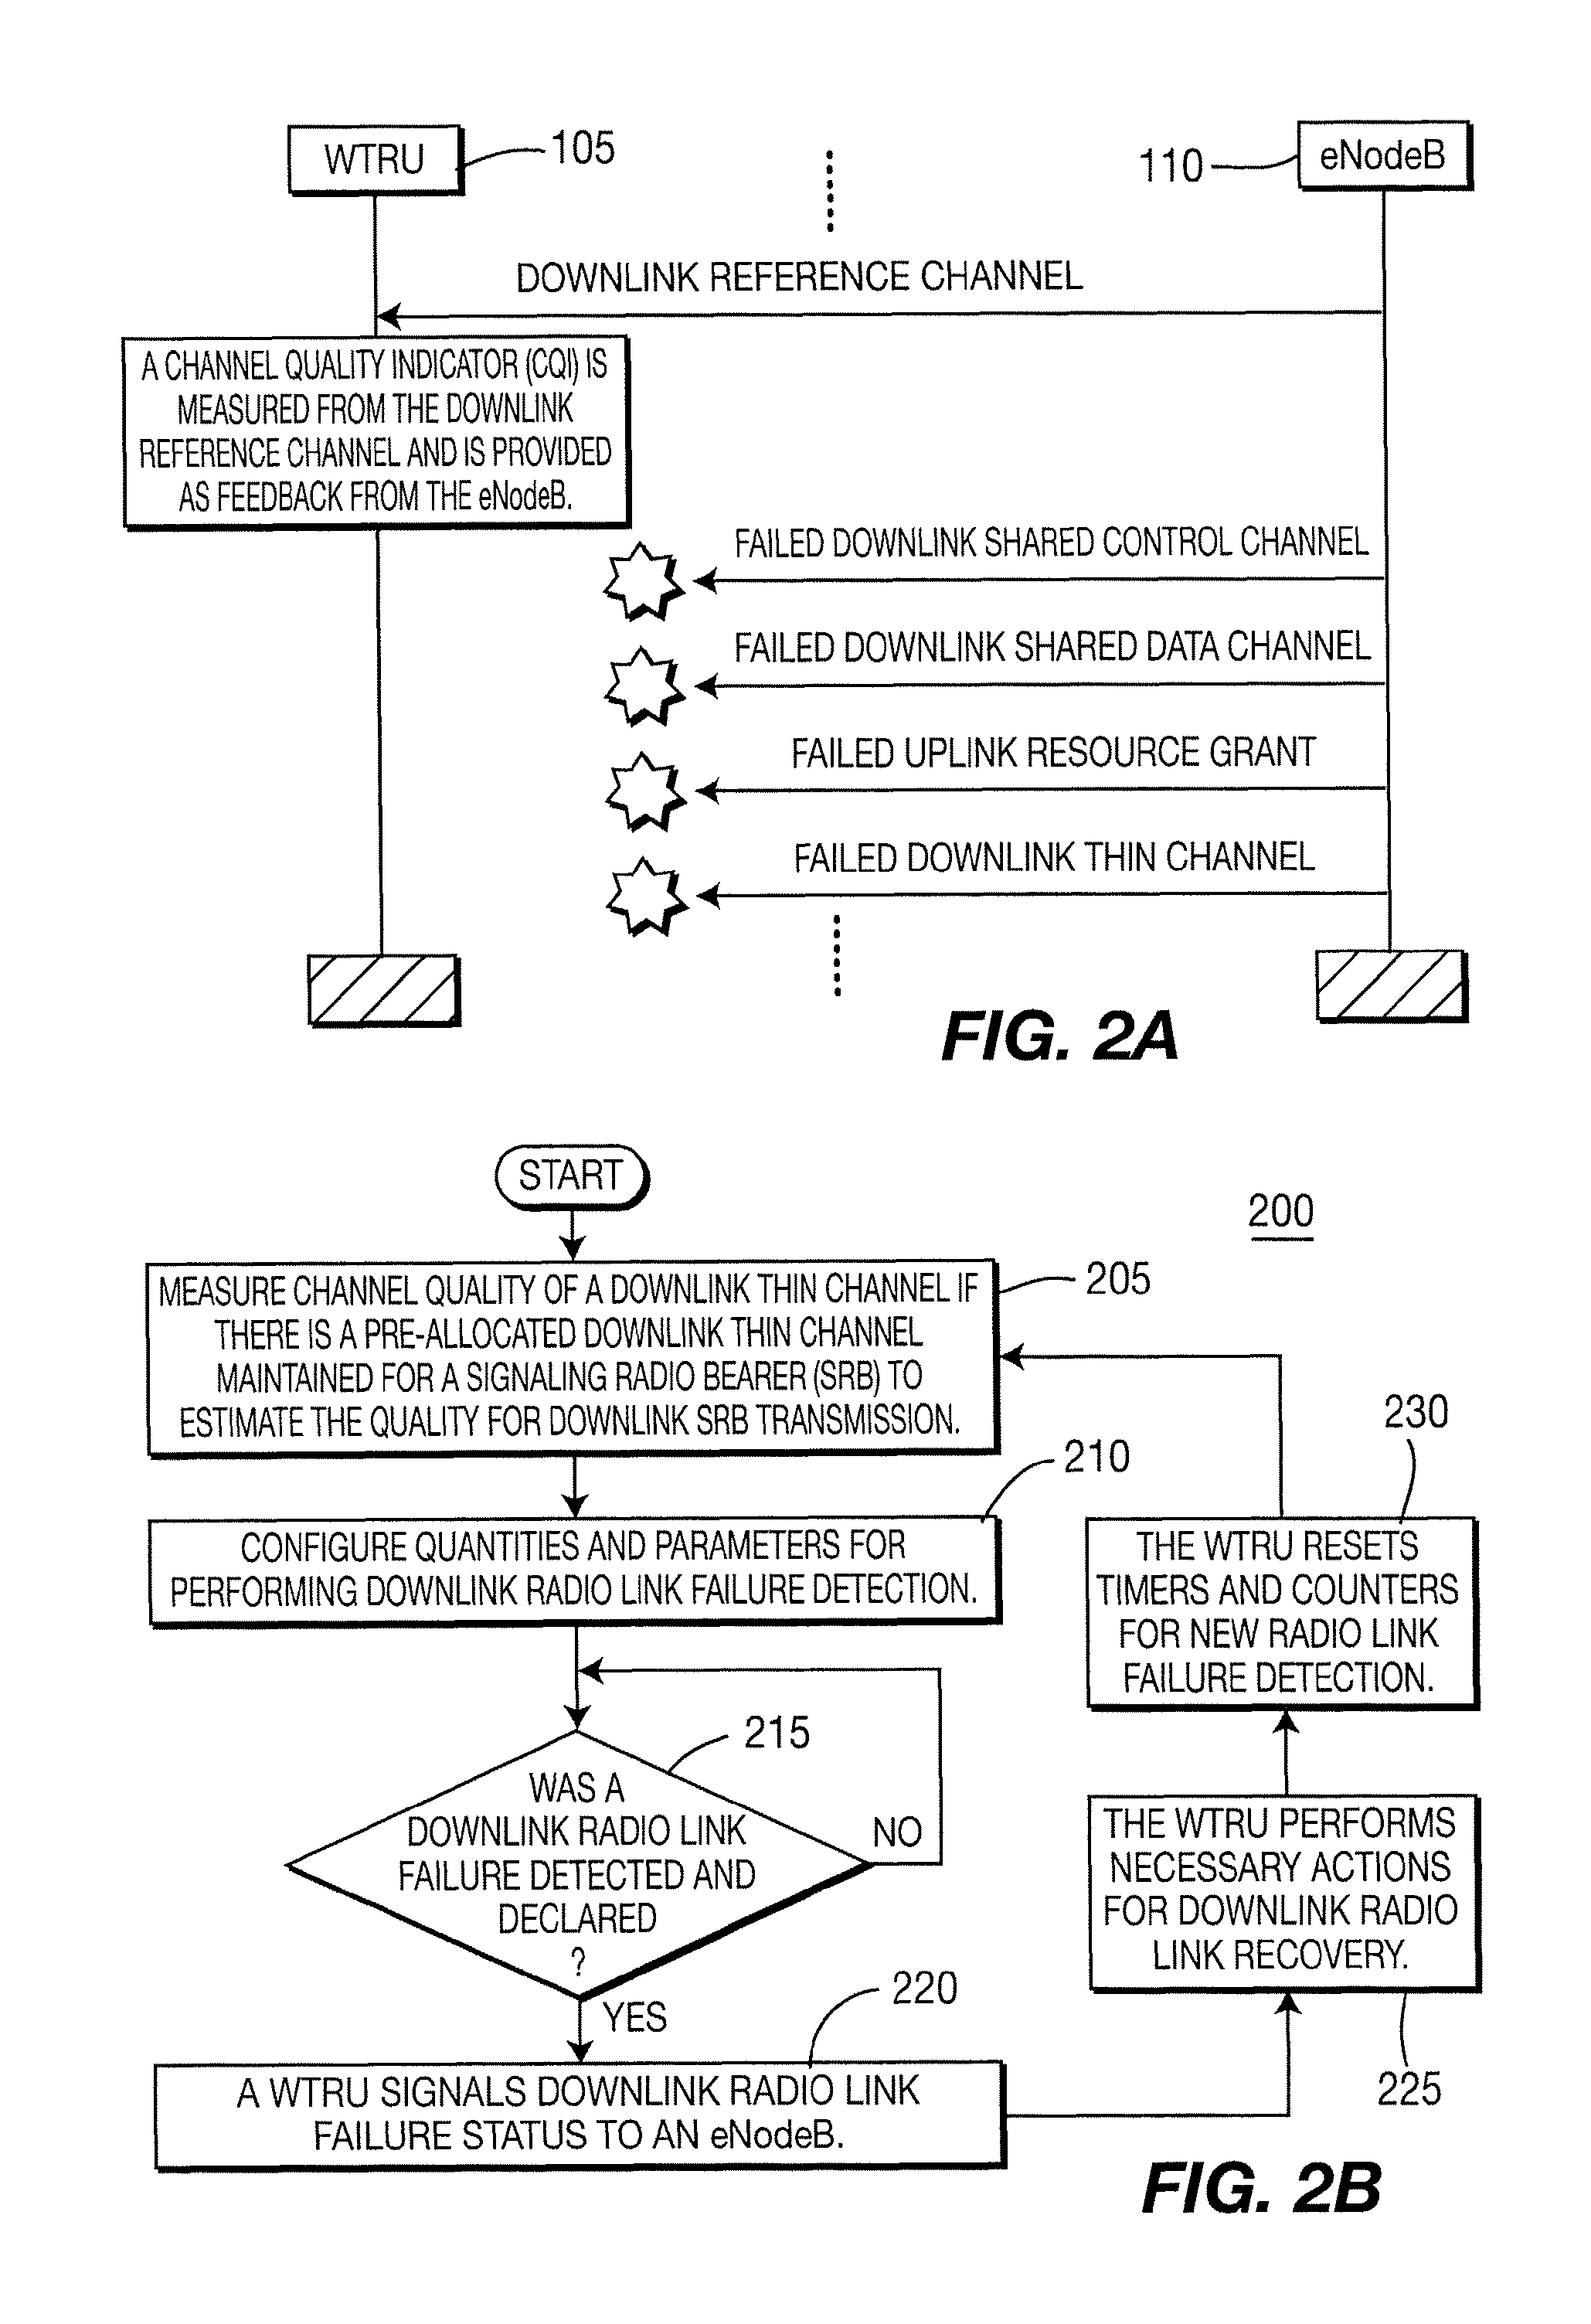 Radio link failure detection procedures in long term evolution uplink and downlink and apparatus therefor